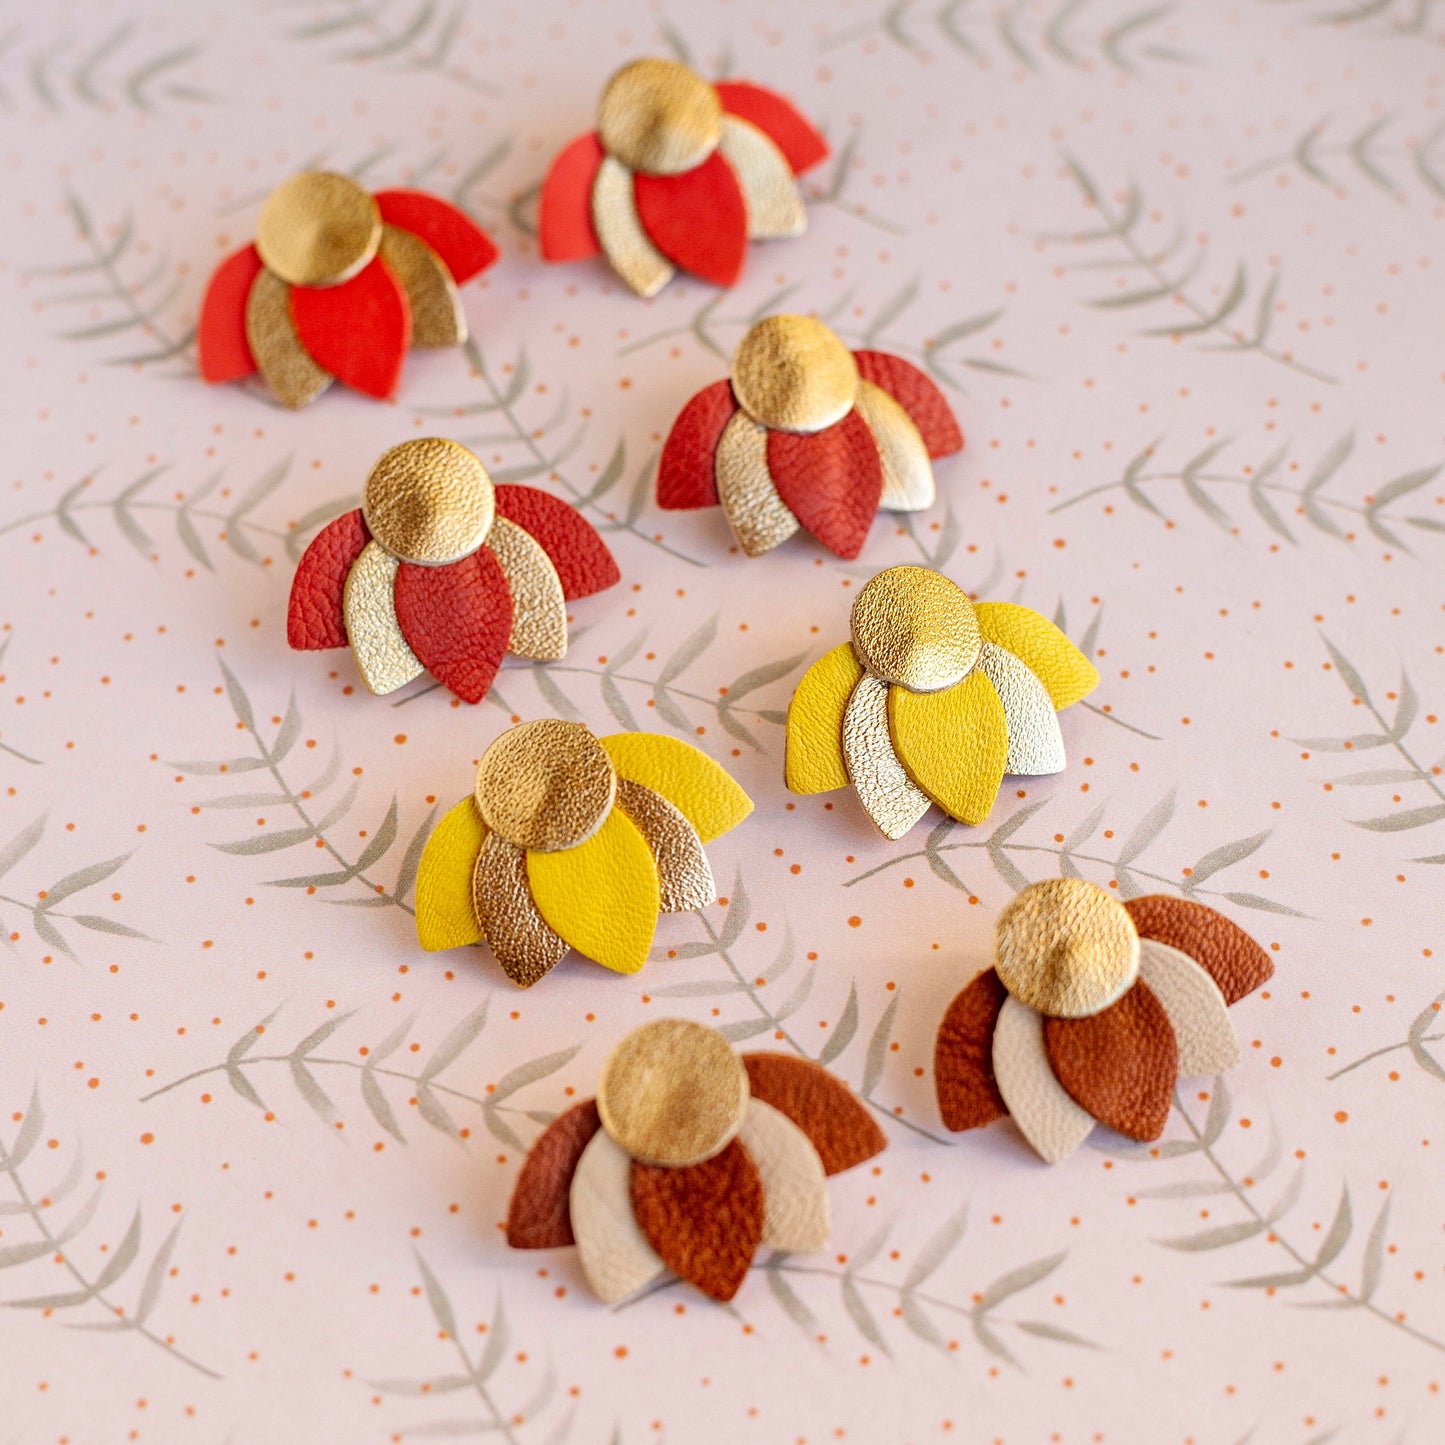 Small lotus flower earrings in orange-red and gold leather